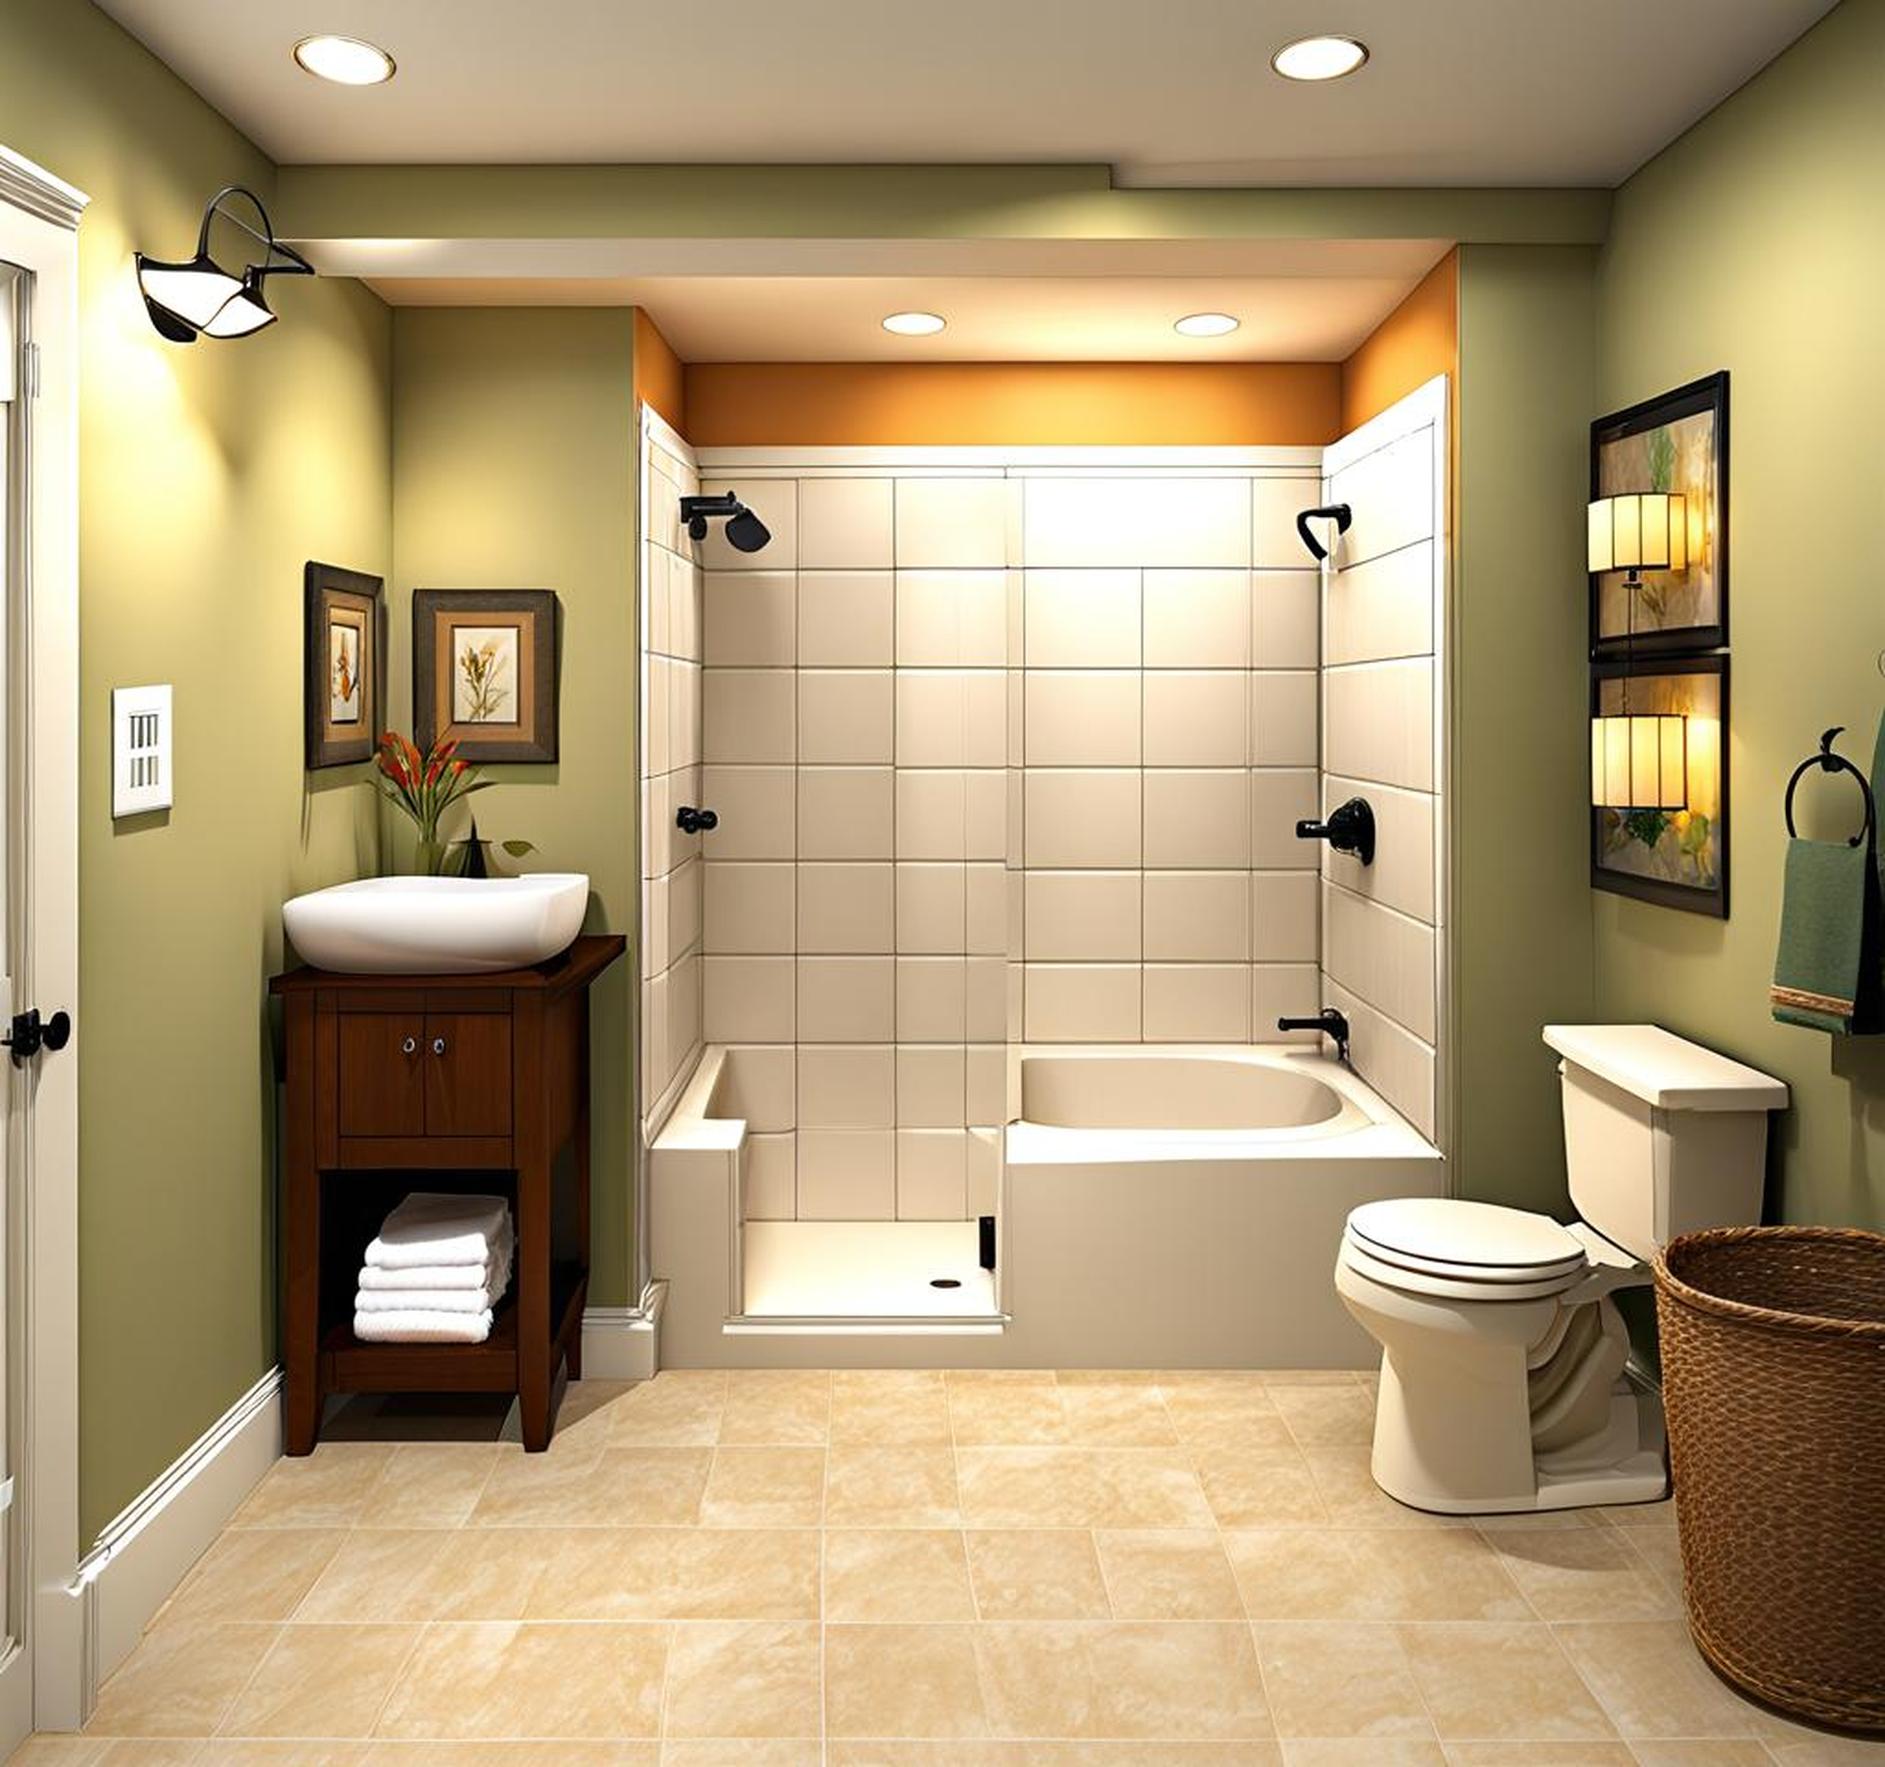 cheapest way to put bathroom in basement